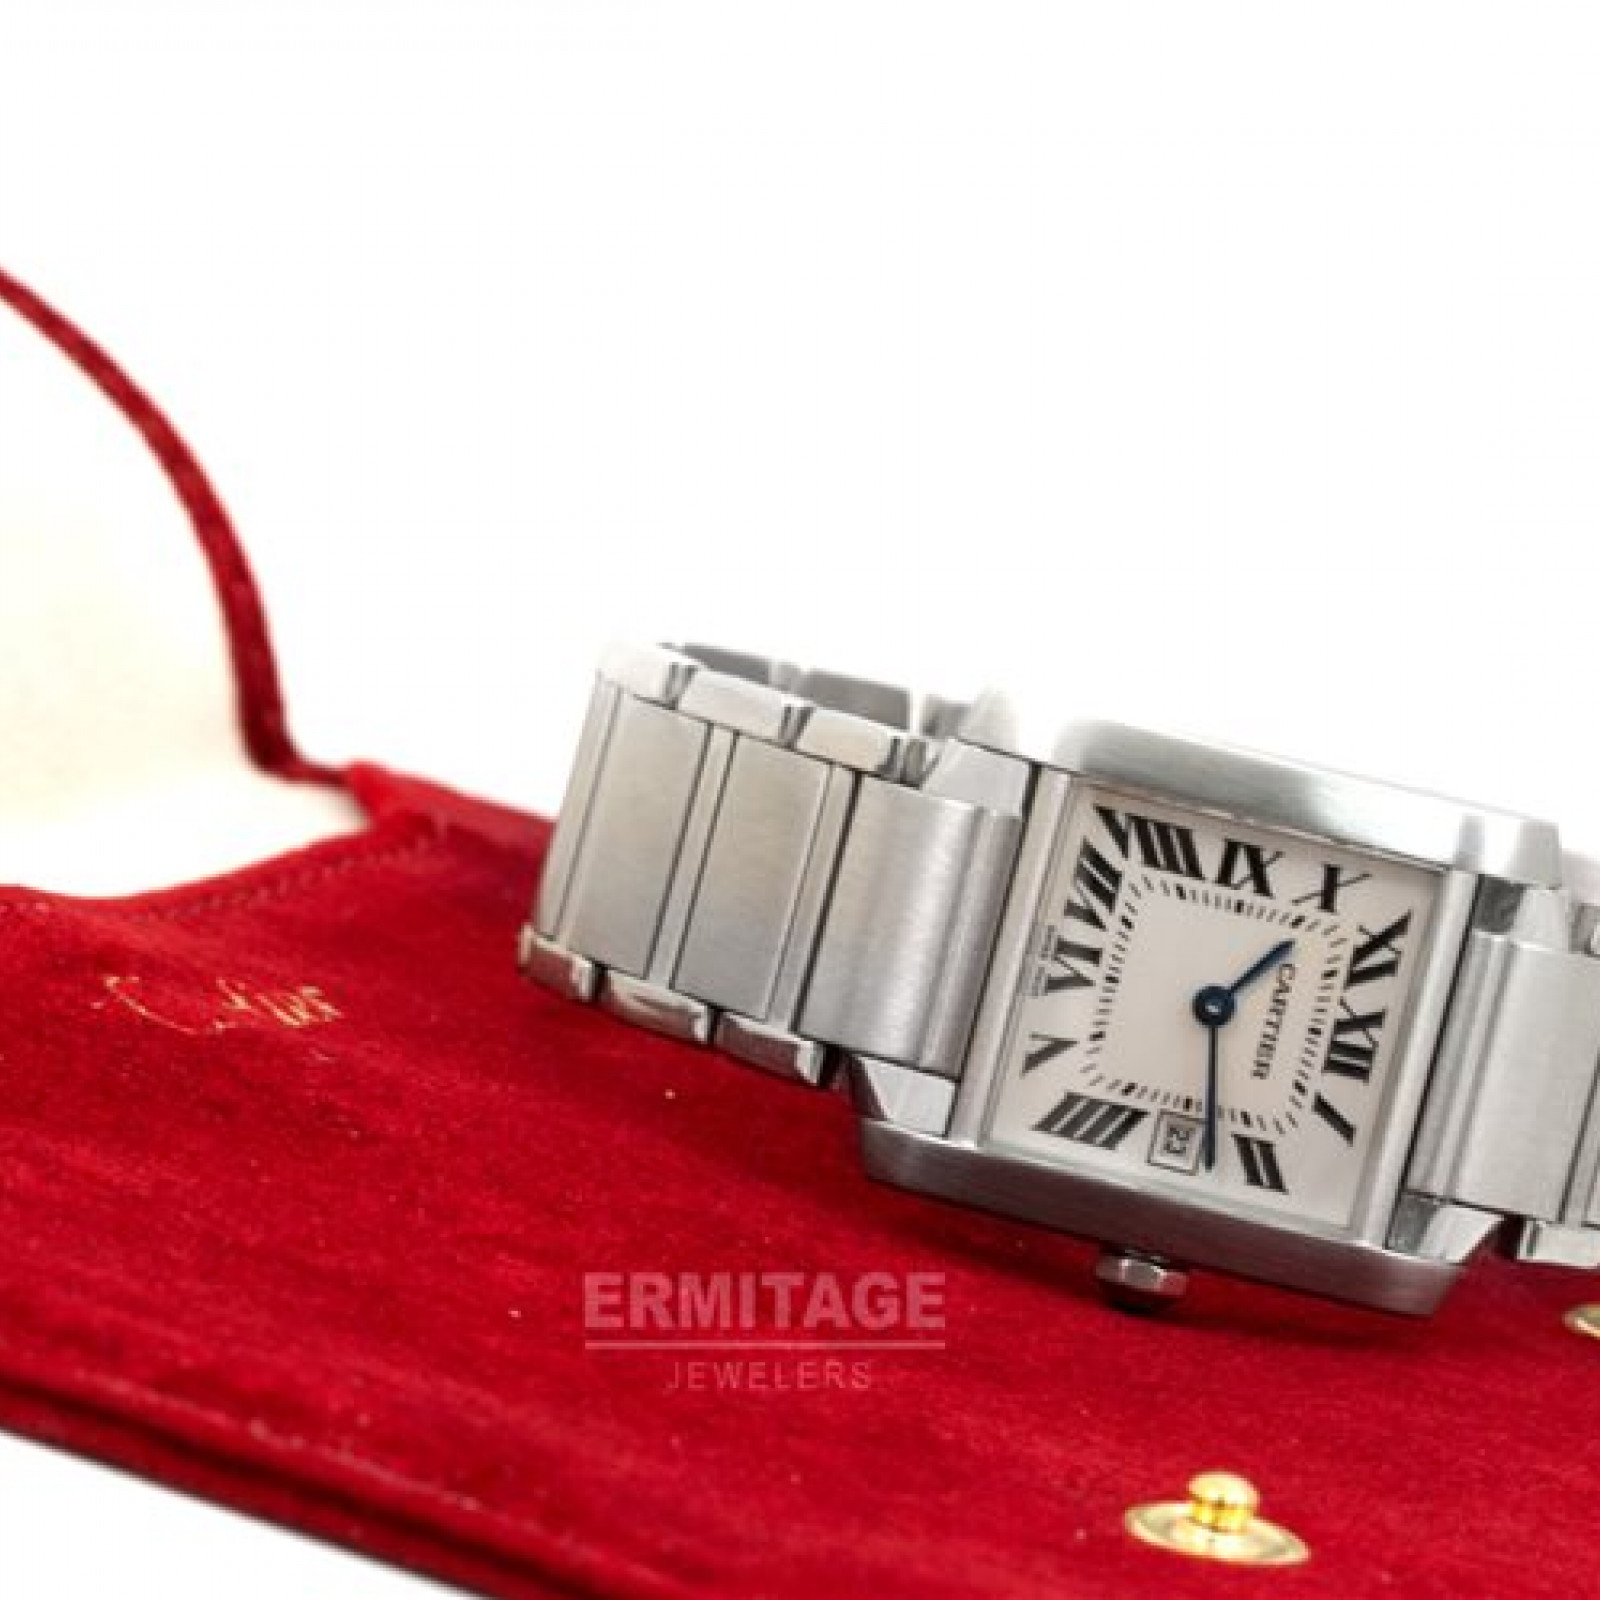 Sell Cartier Tank Francaise W51011Q3 Used